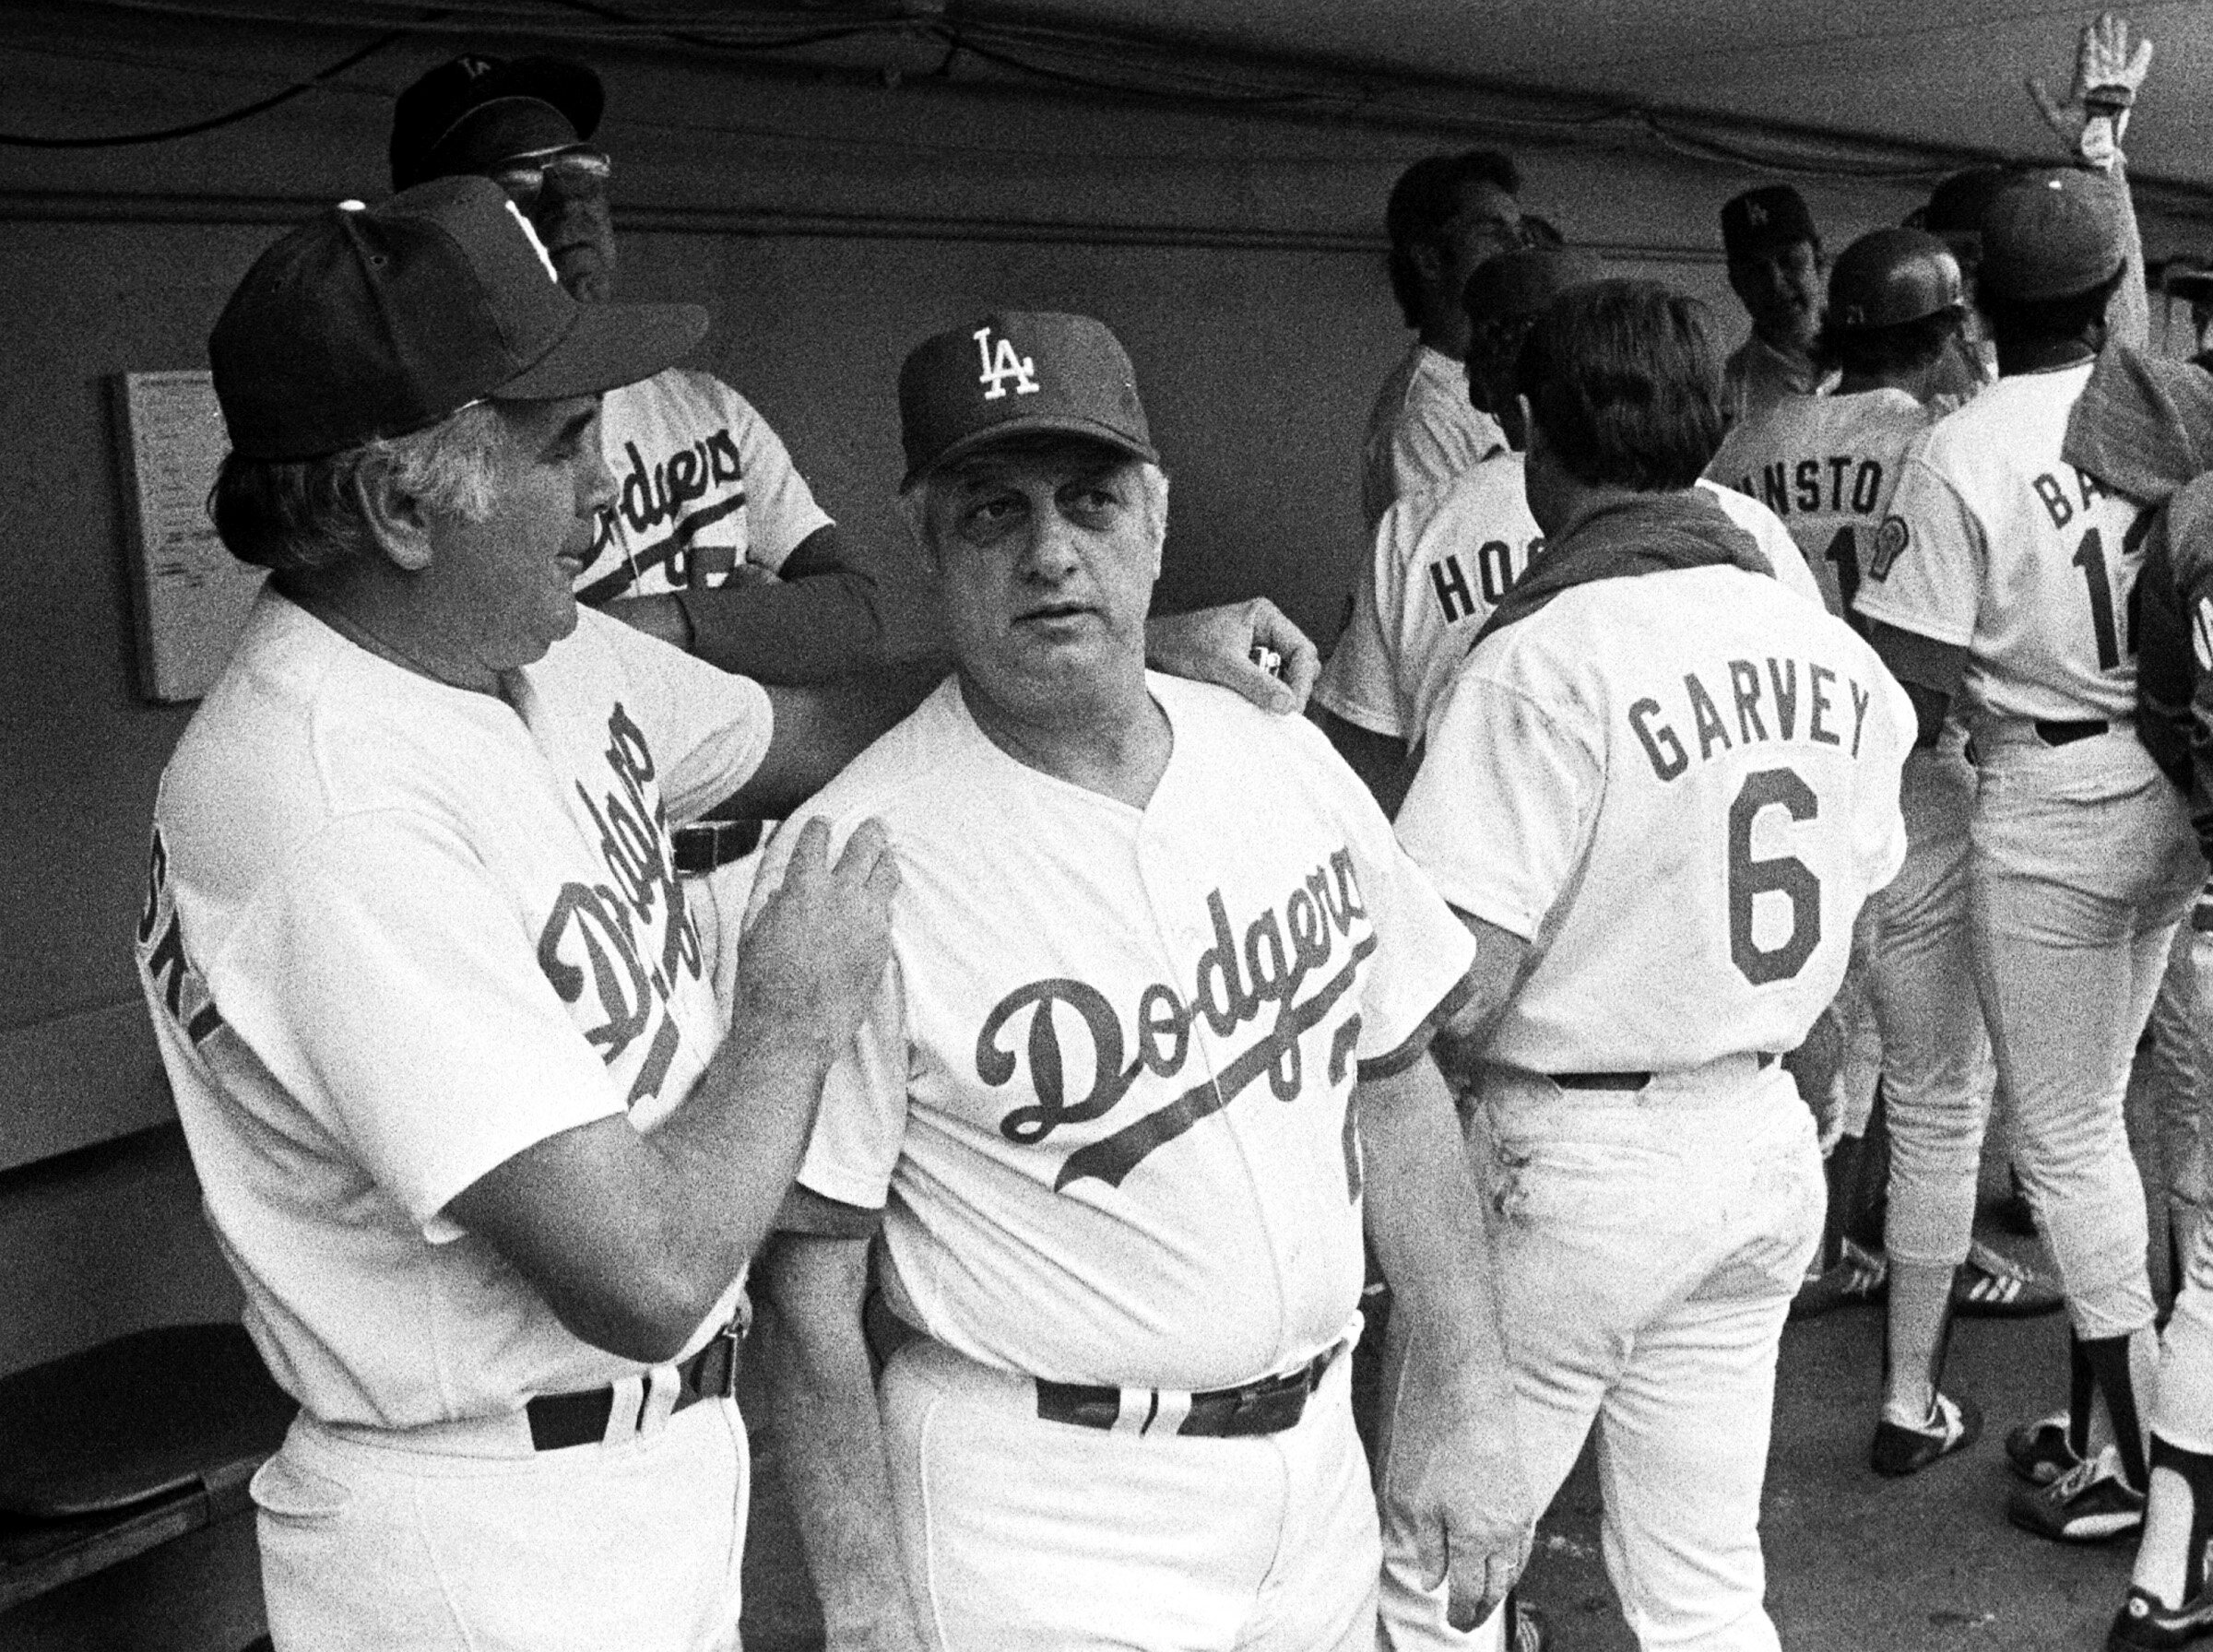  LOS ANGELES, CA - OCTOBER 1981: Pitching coach Ron Perranoski, manager Tommy Lasorda #2 and first baseman Steve Garvey #6 of the Los Angeles Dodgers in the dugout during the 1981 NLCS playoffs1981 at Dodger Stadium, Los Angeles, California. (Photo b